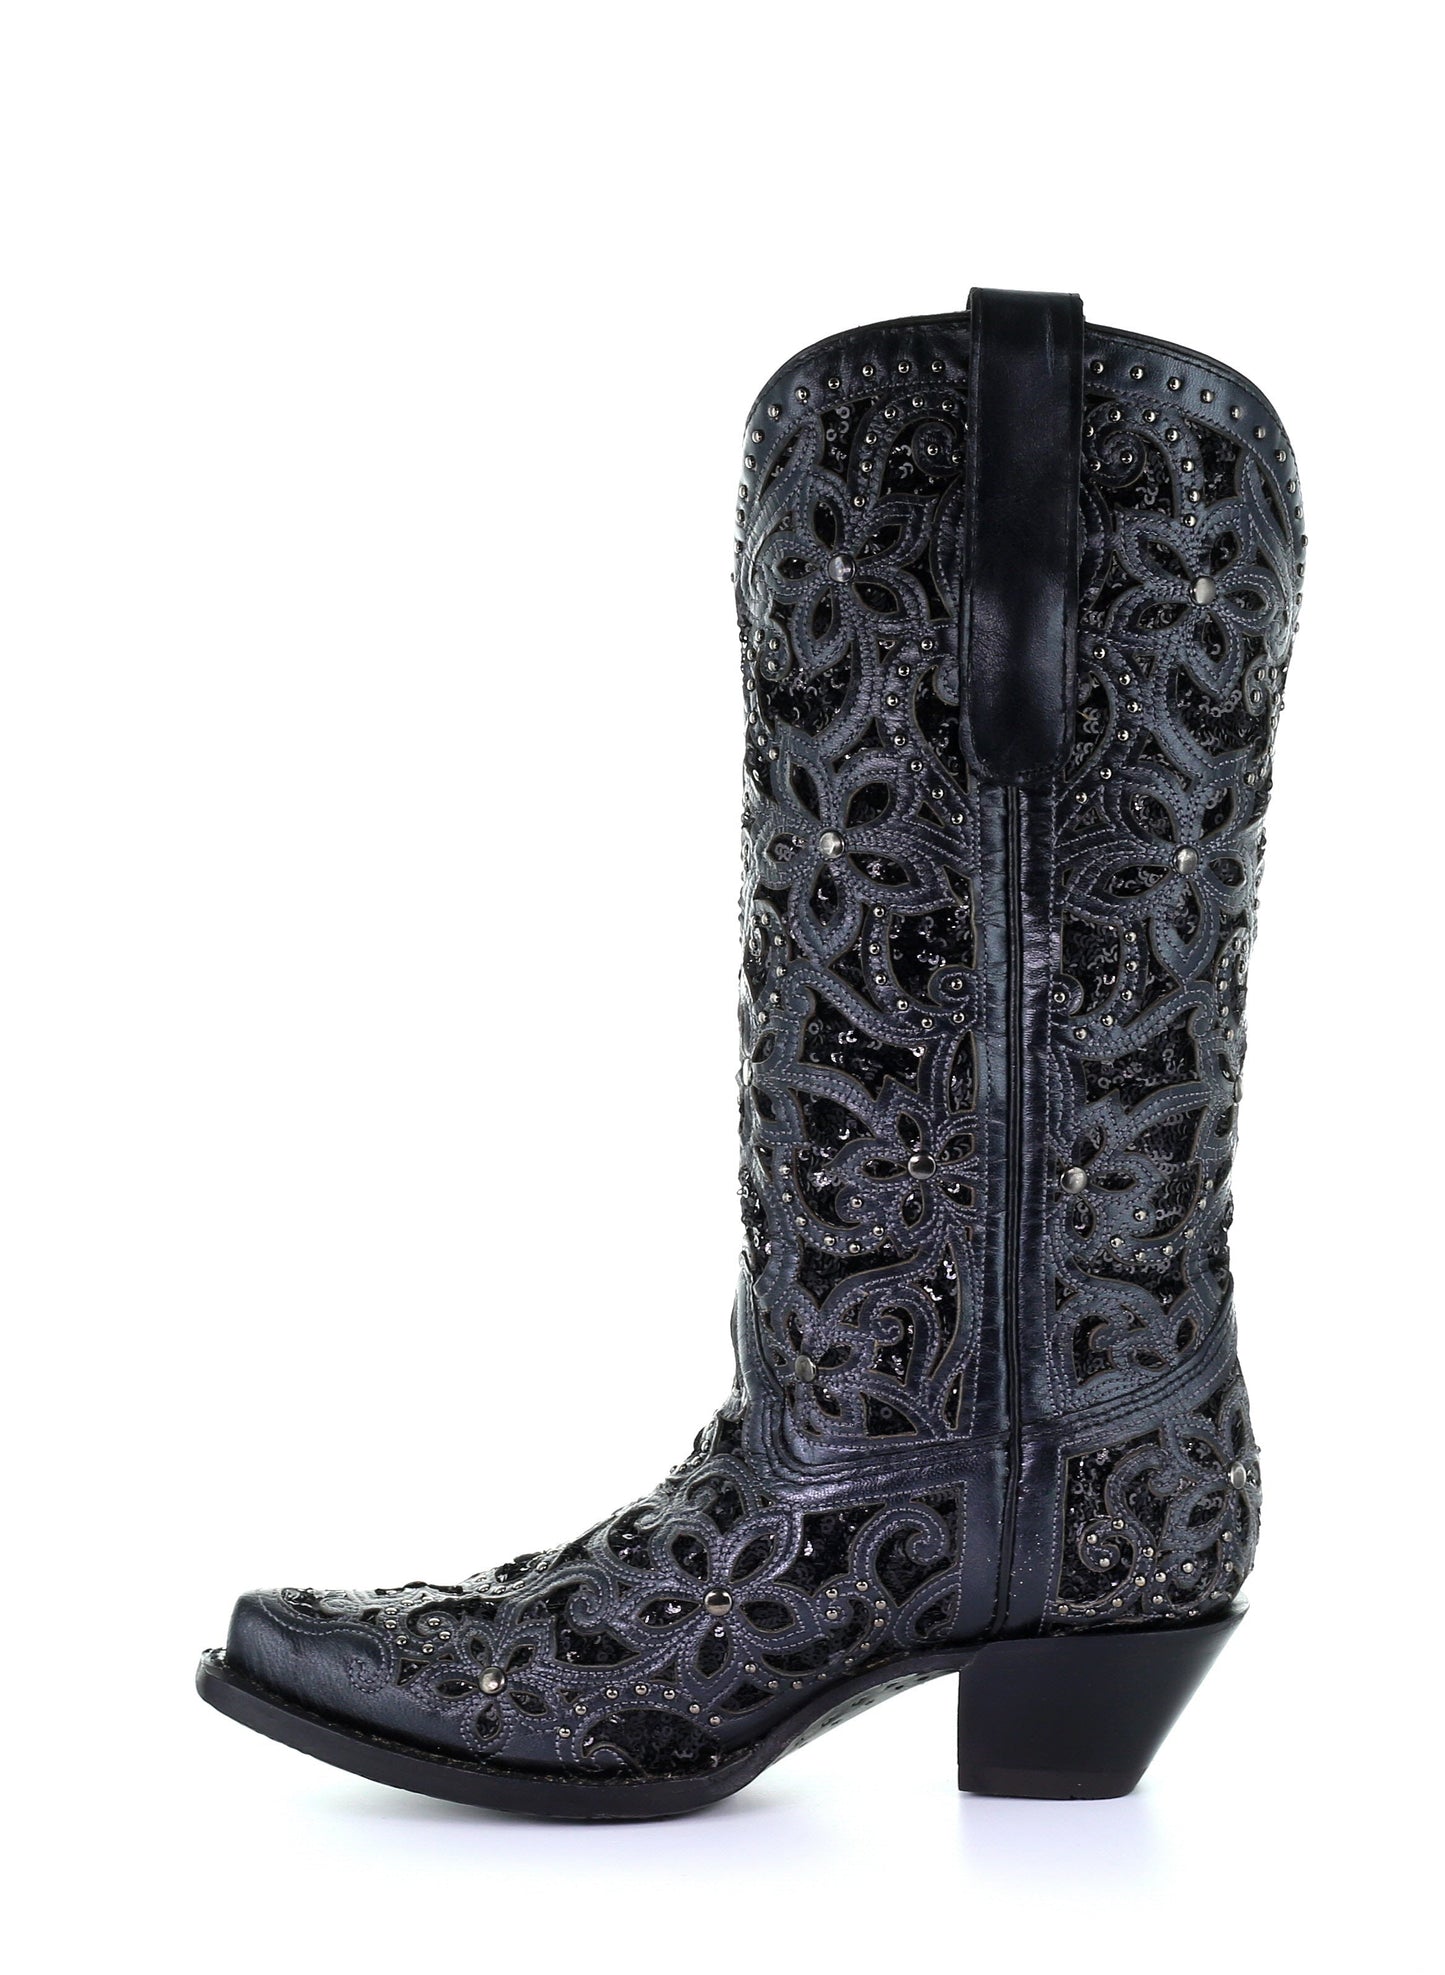 A3752 - Corral black western cowgirl leather boots for women-Kuet.us